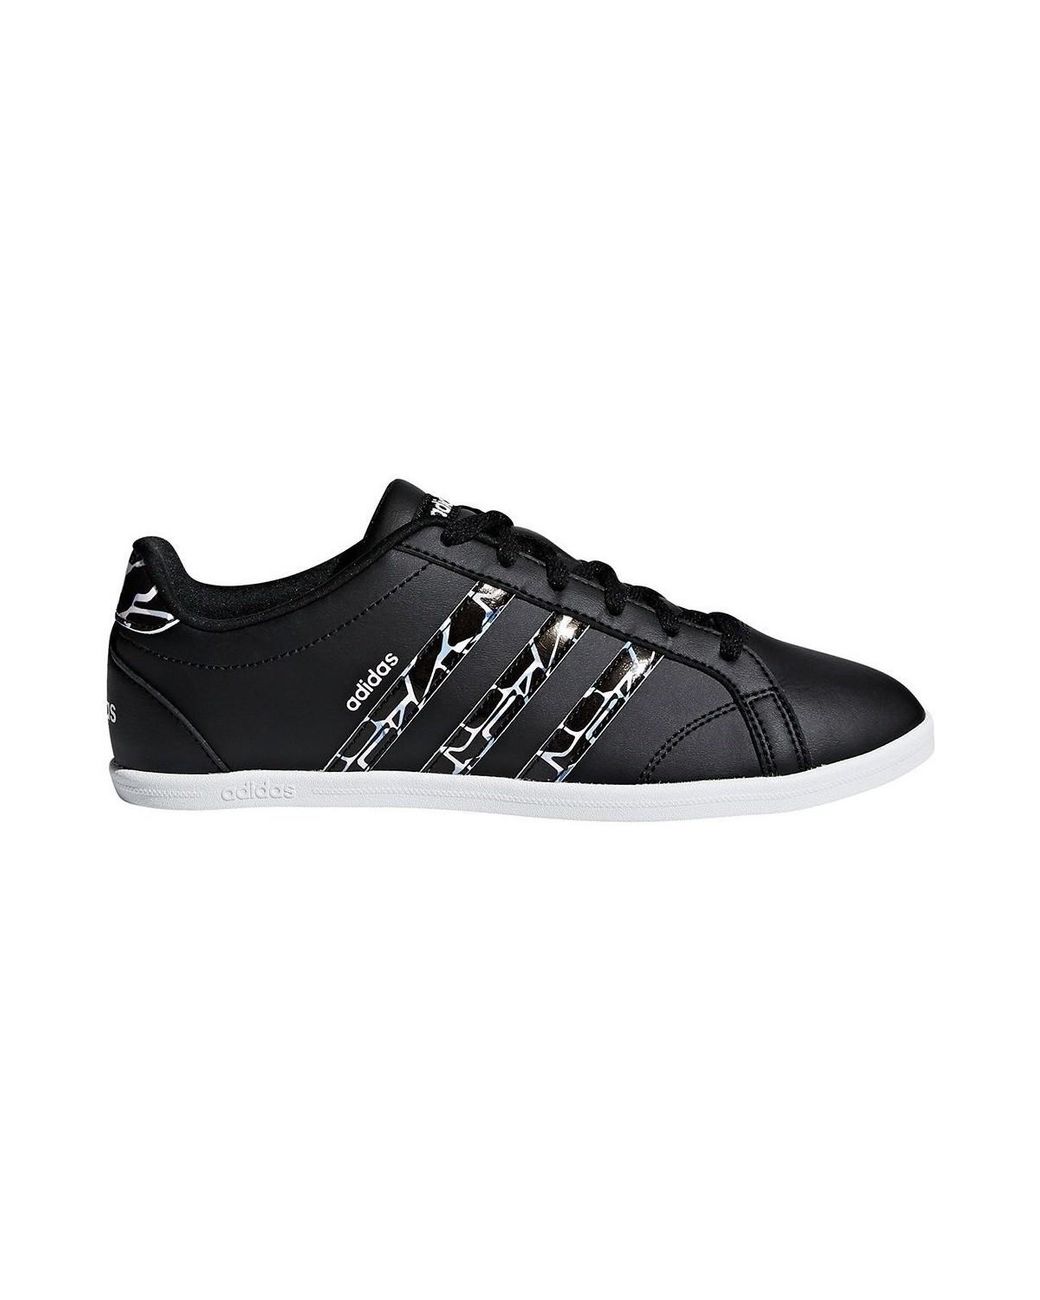 sneakers femme adidas coneo